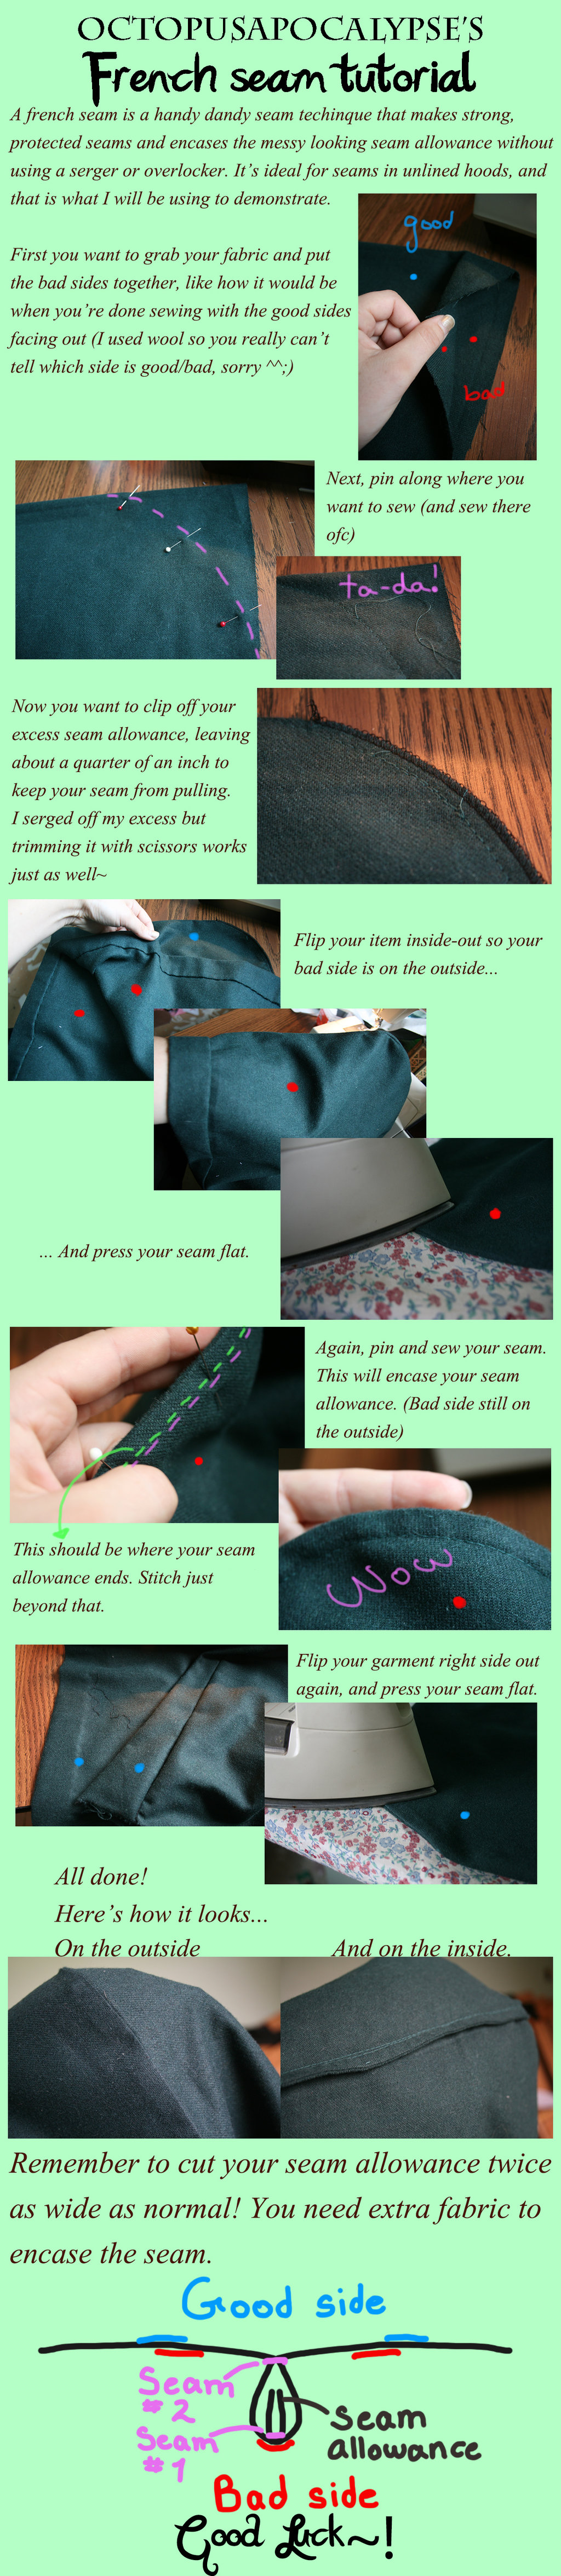 French seam tutorial by Octopusapocalypse on